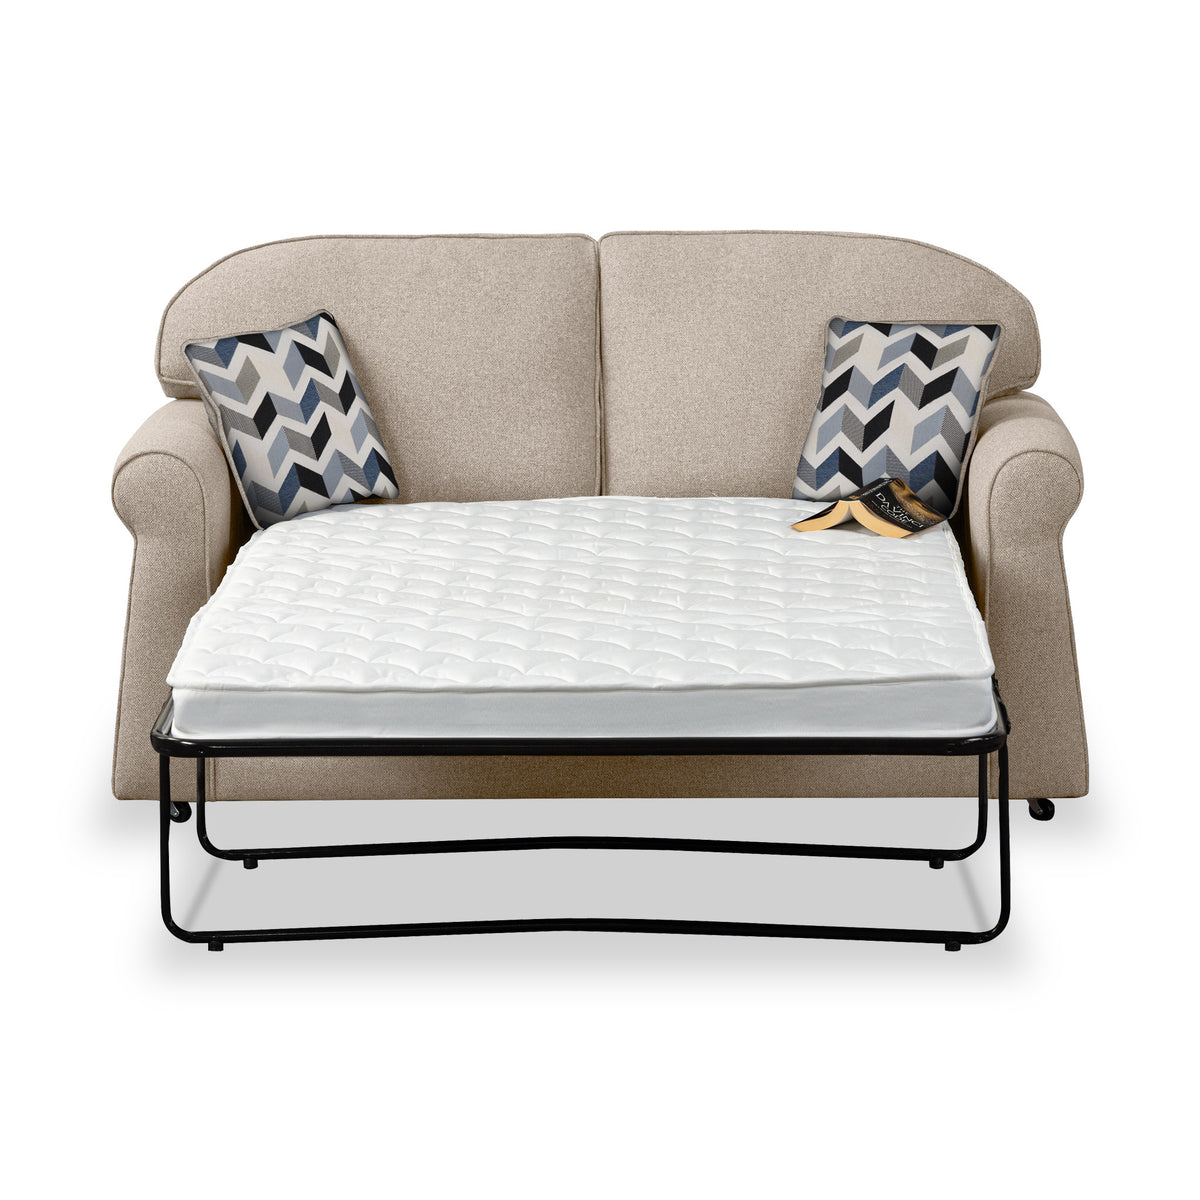 Giselle Fawn Soft Weave 2 Seater Sofabed with Denim Scatter Cushions from Roseland Furniture